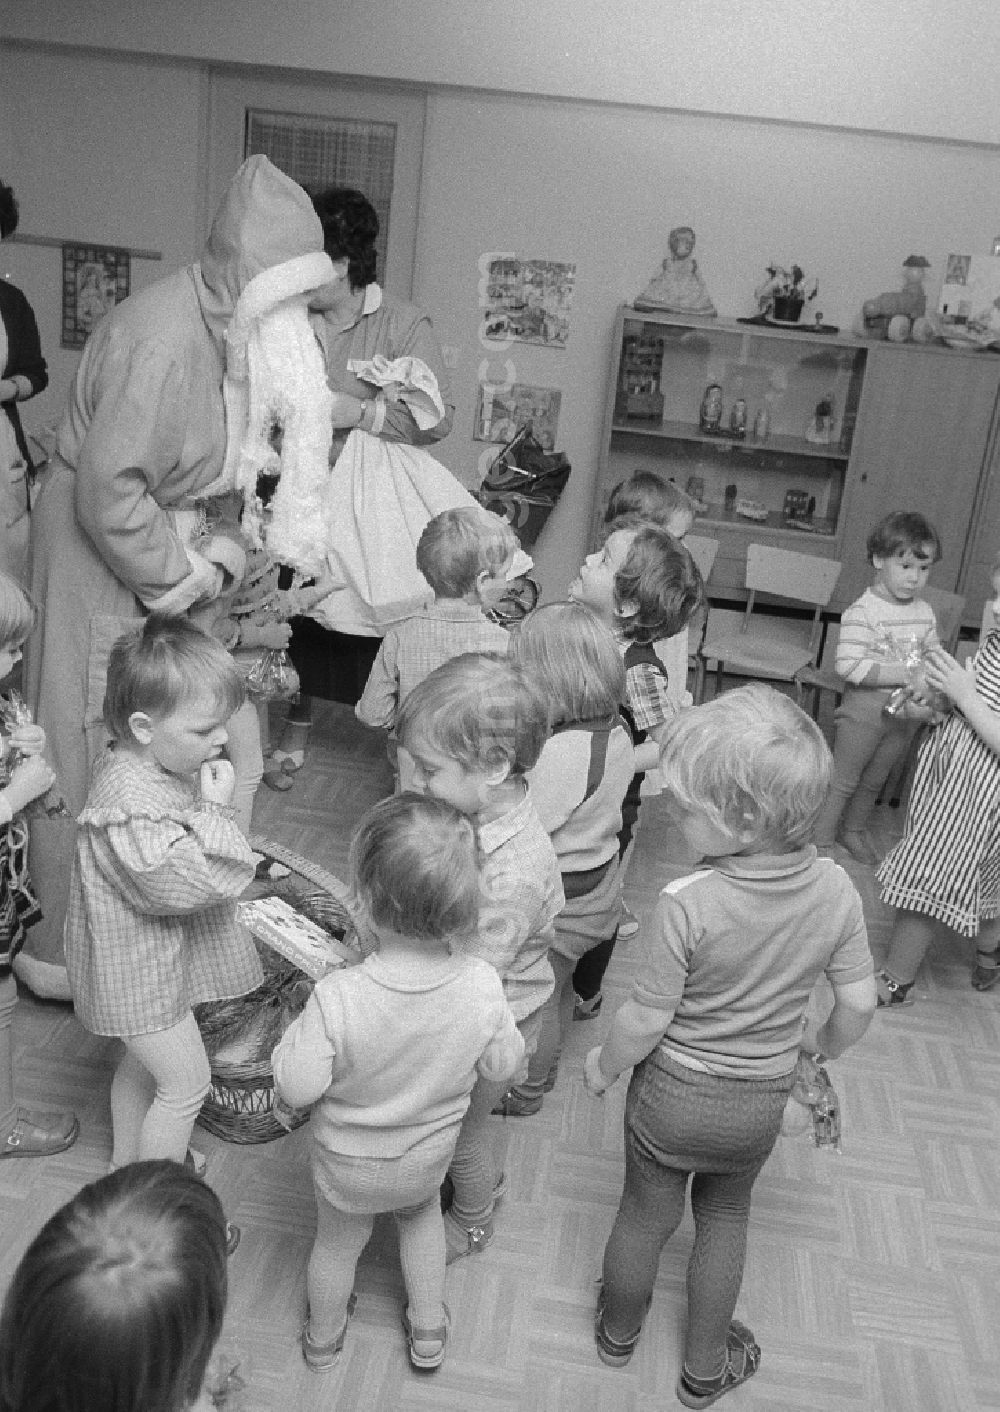 Berlin: The Santa Claus gives children with presents in a kindergarten in Berlin, the former capital of the GDR, German democratic republic